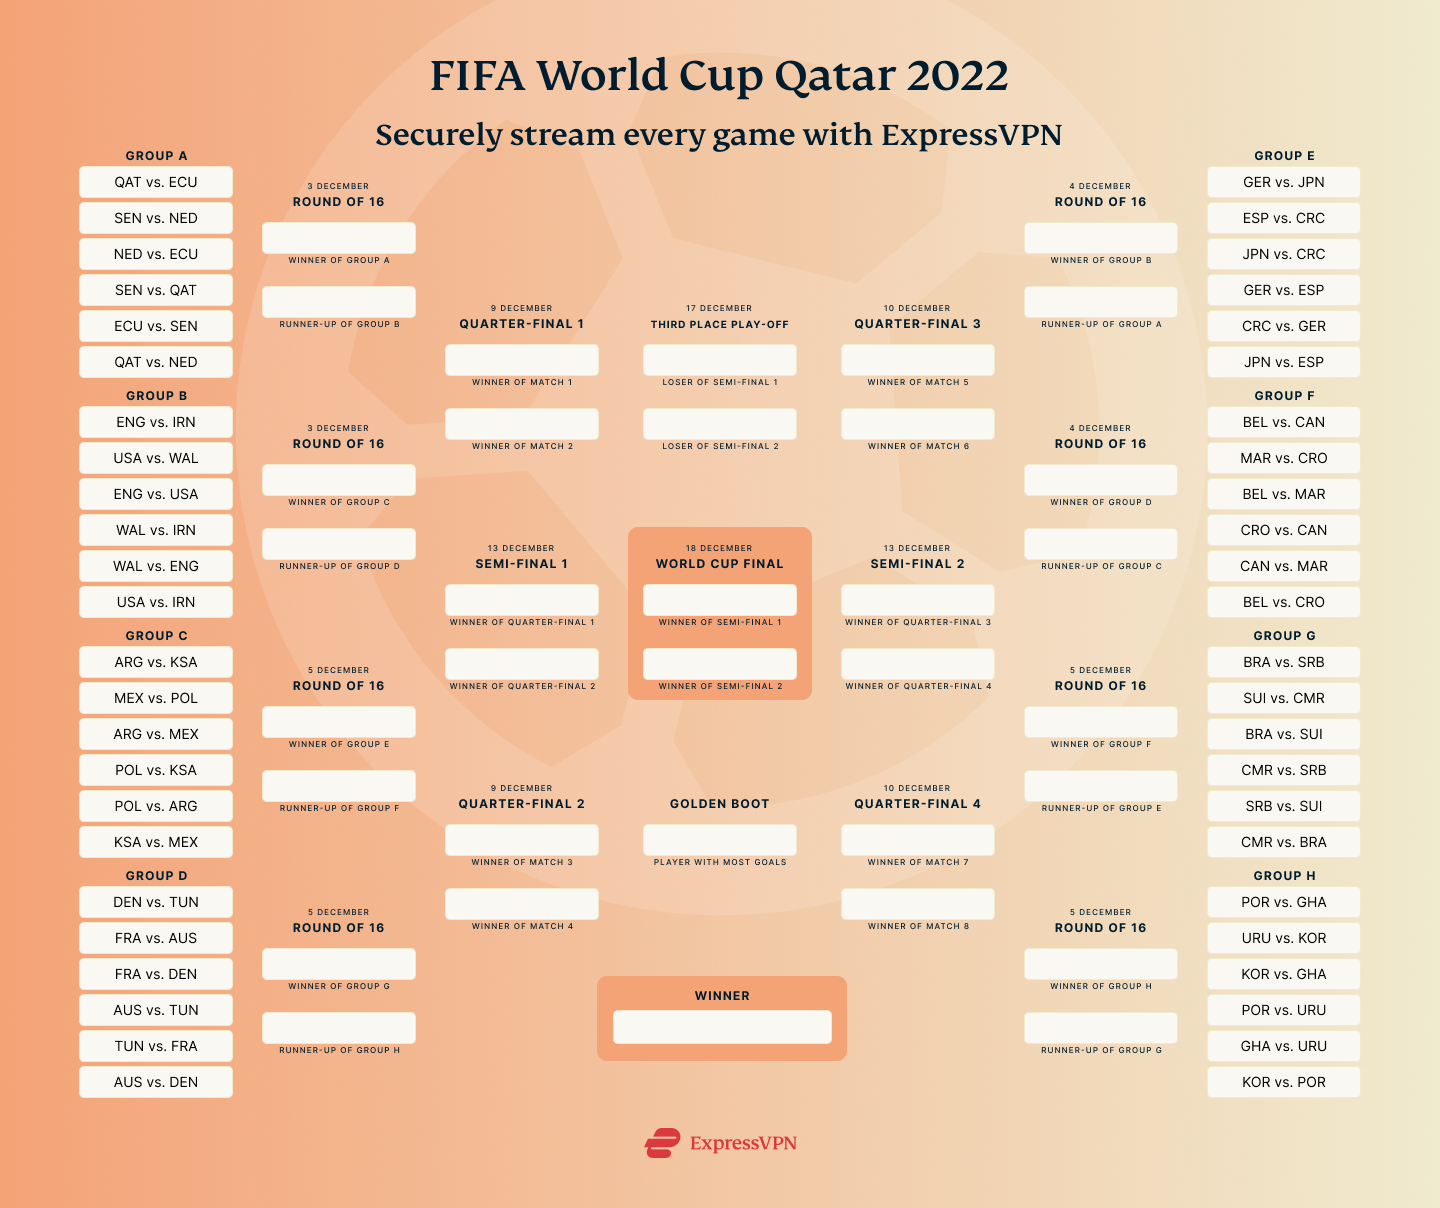 Play off world cup 2022